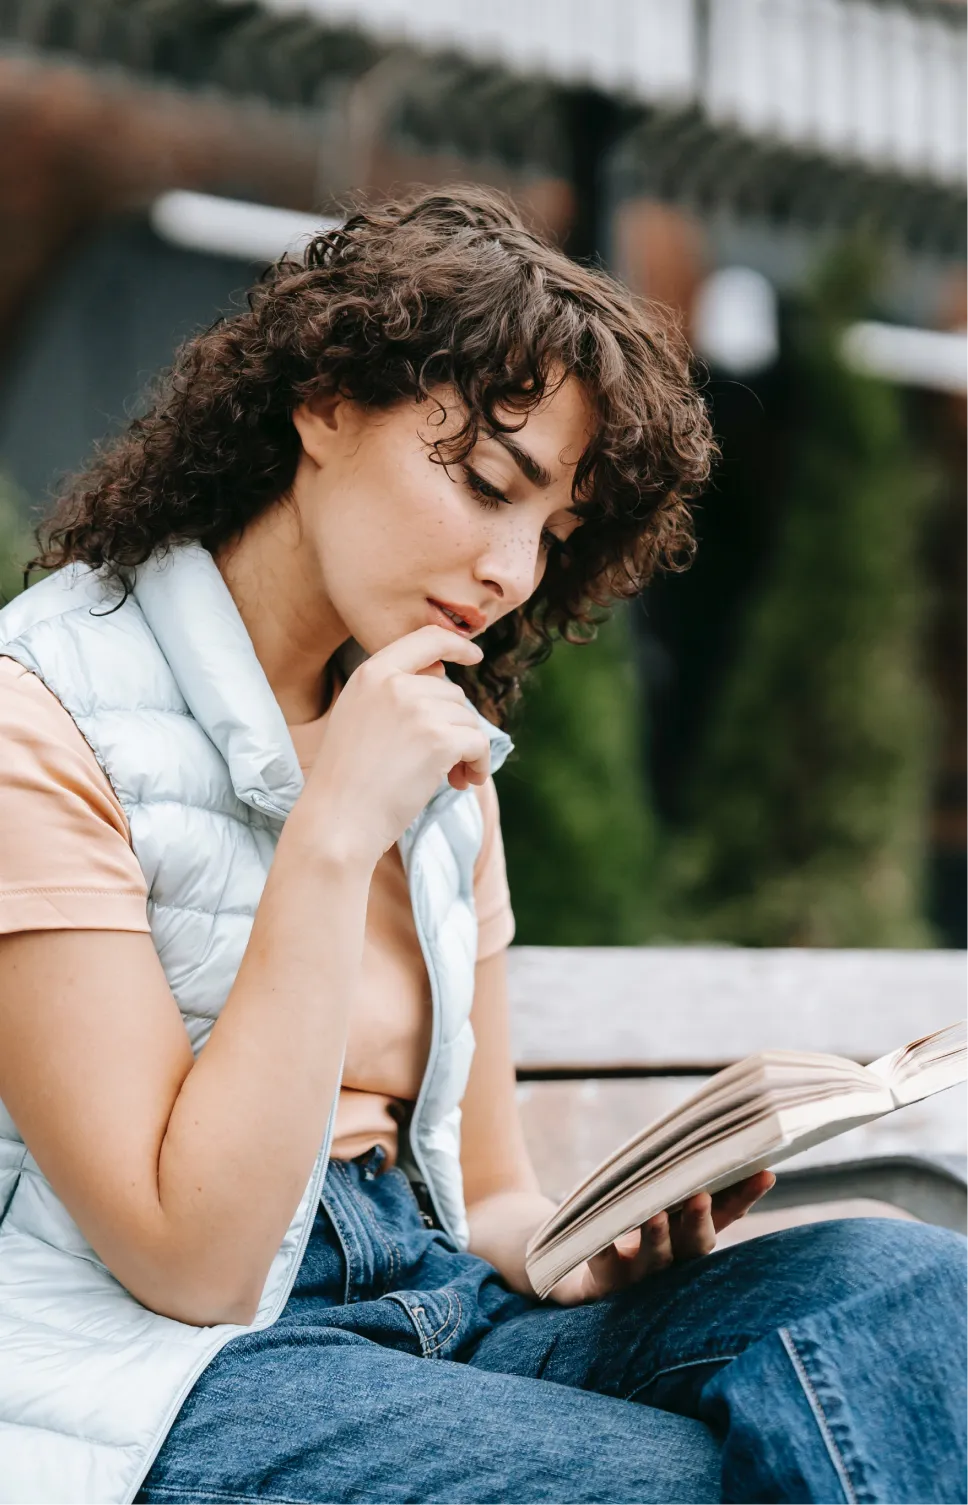 A woman with curly hair and a peach short sleeved shirt sitting down a reading a book wih her hand on her chin.